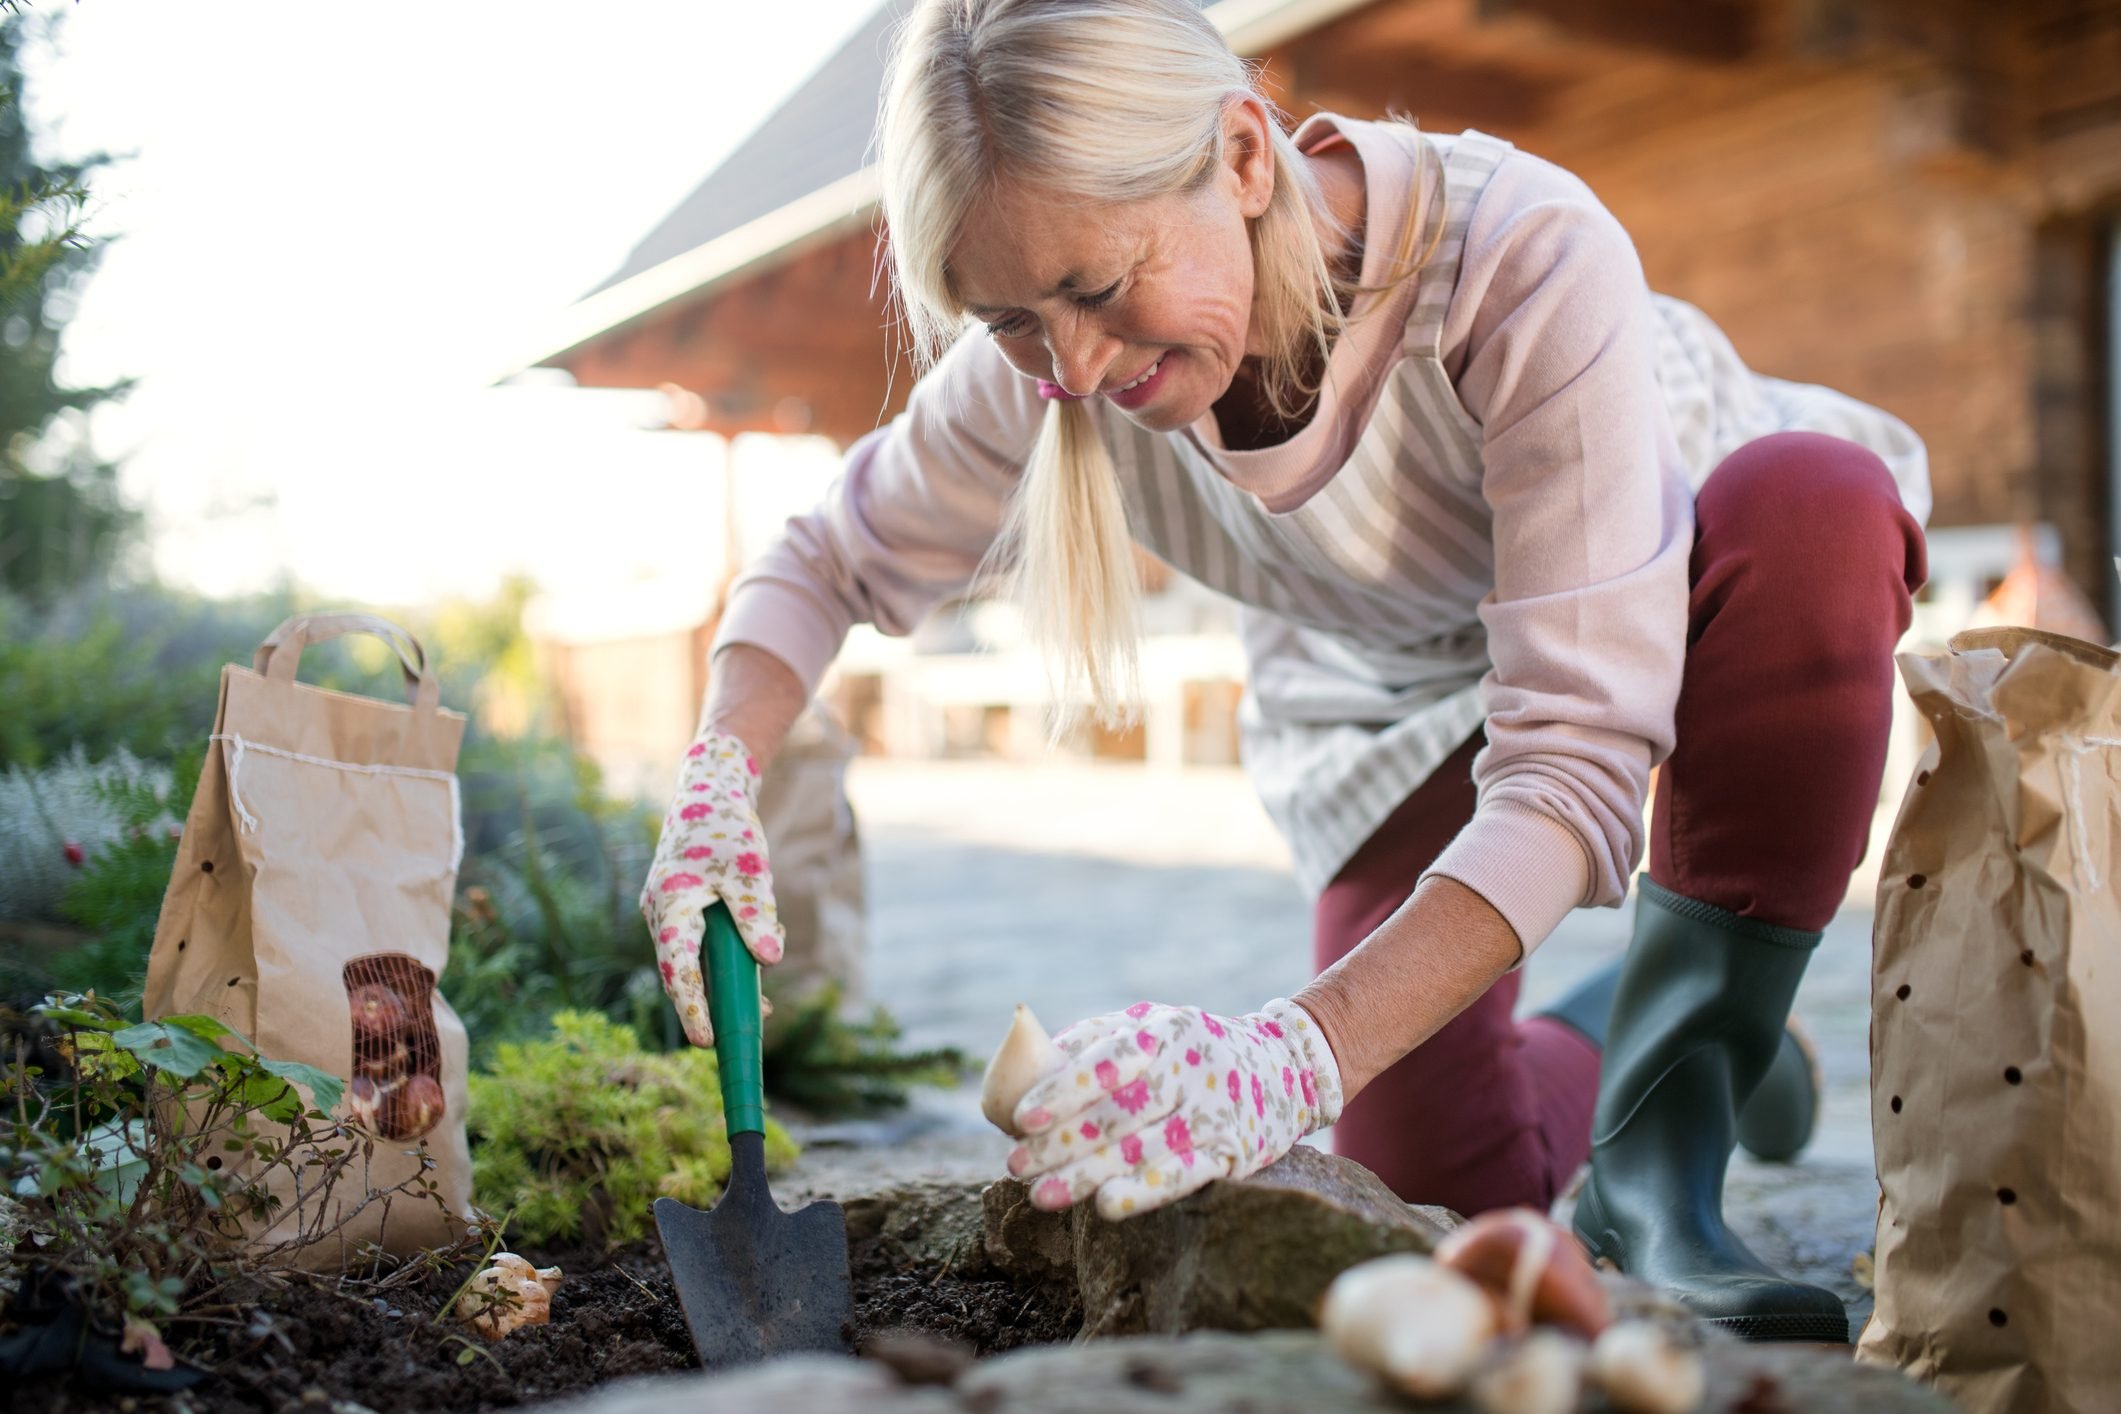 How To Prepare Your Garden For Winter, When To Prepare Garden For Winter